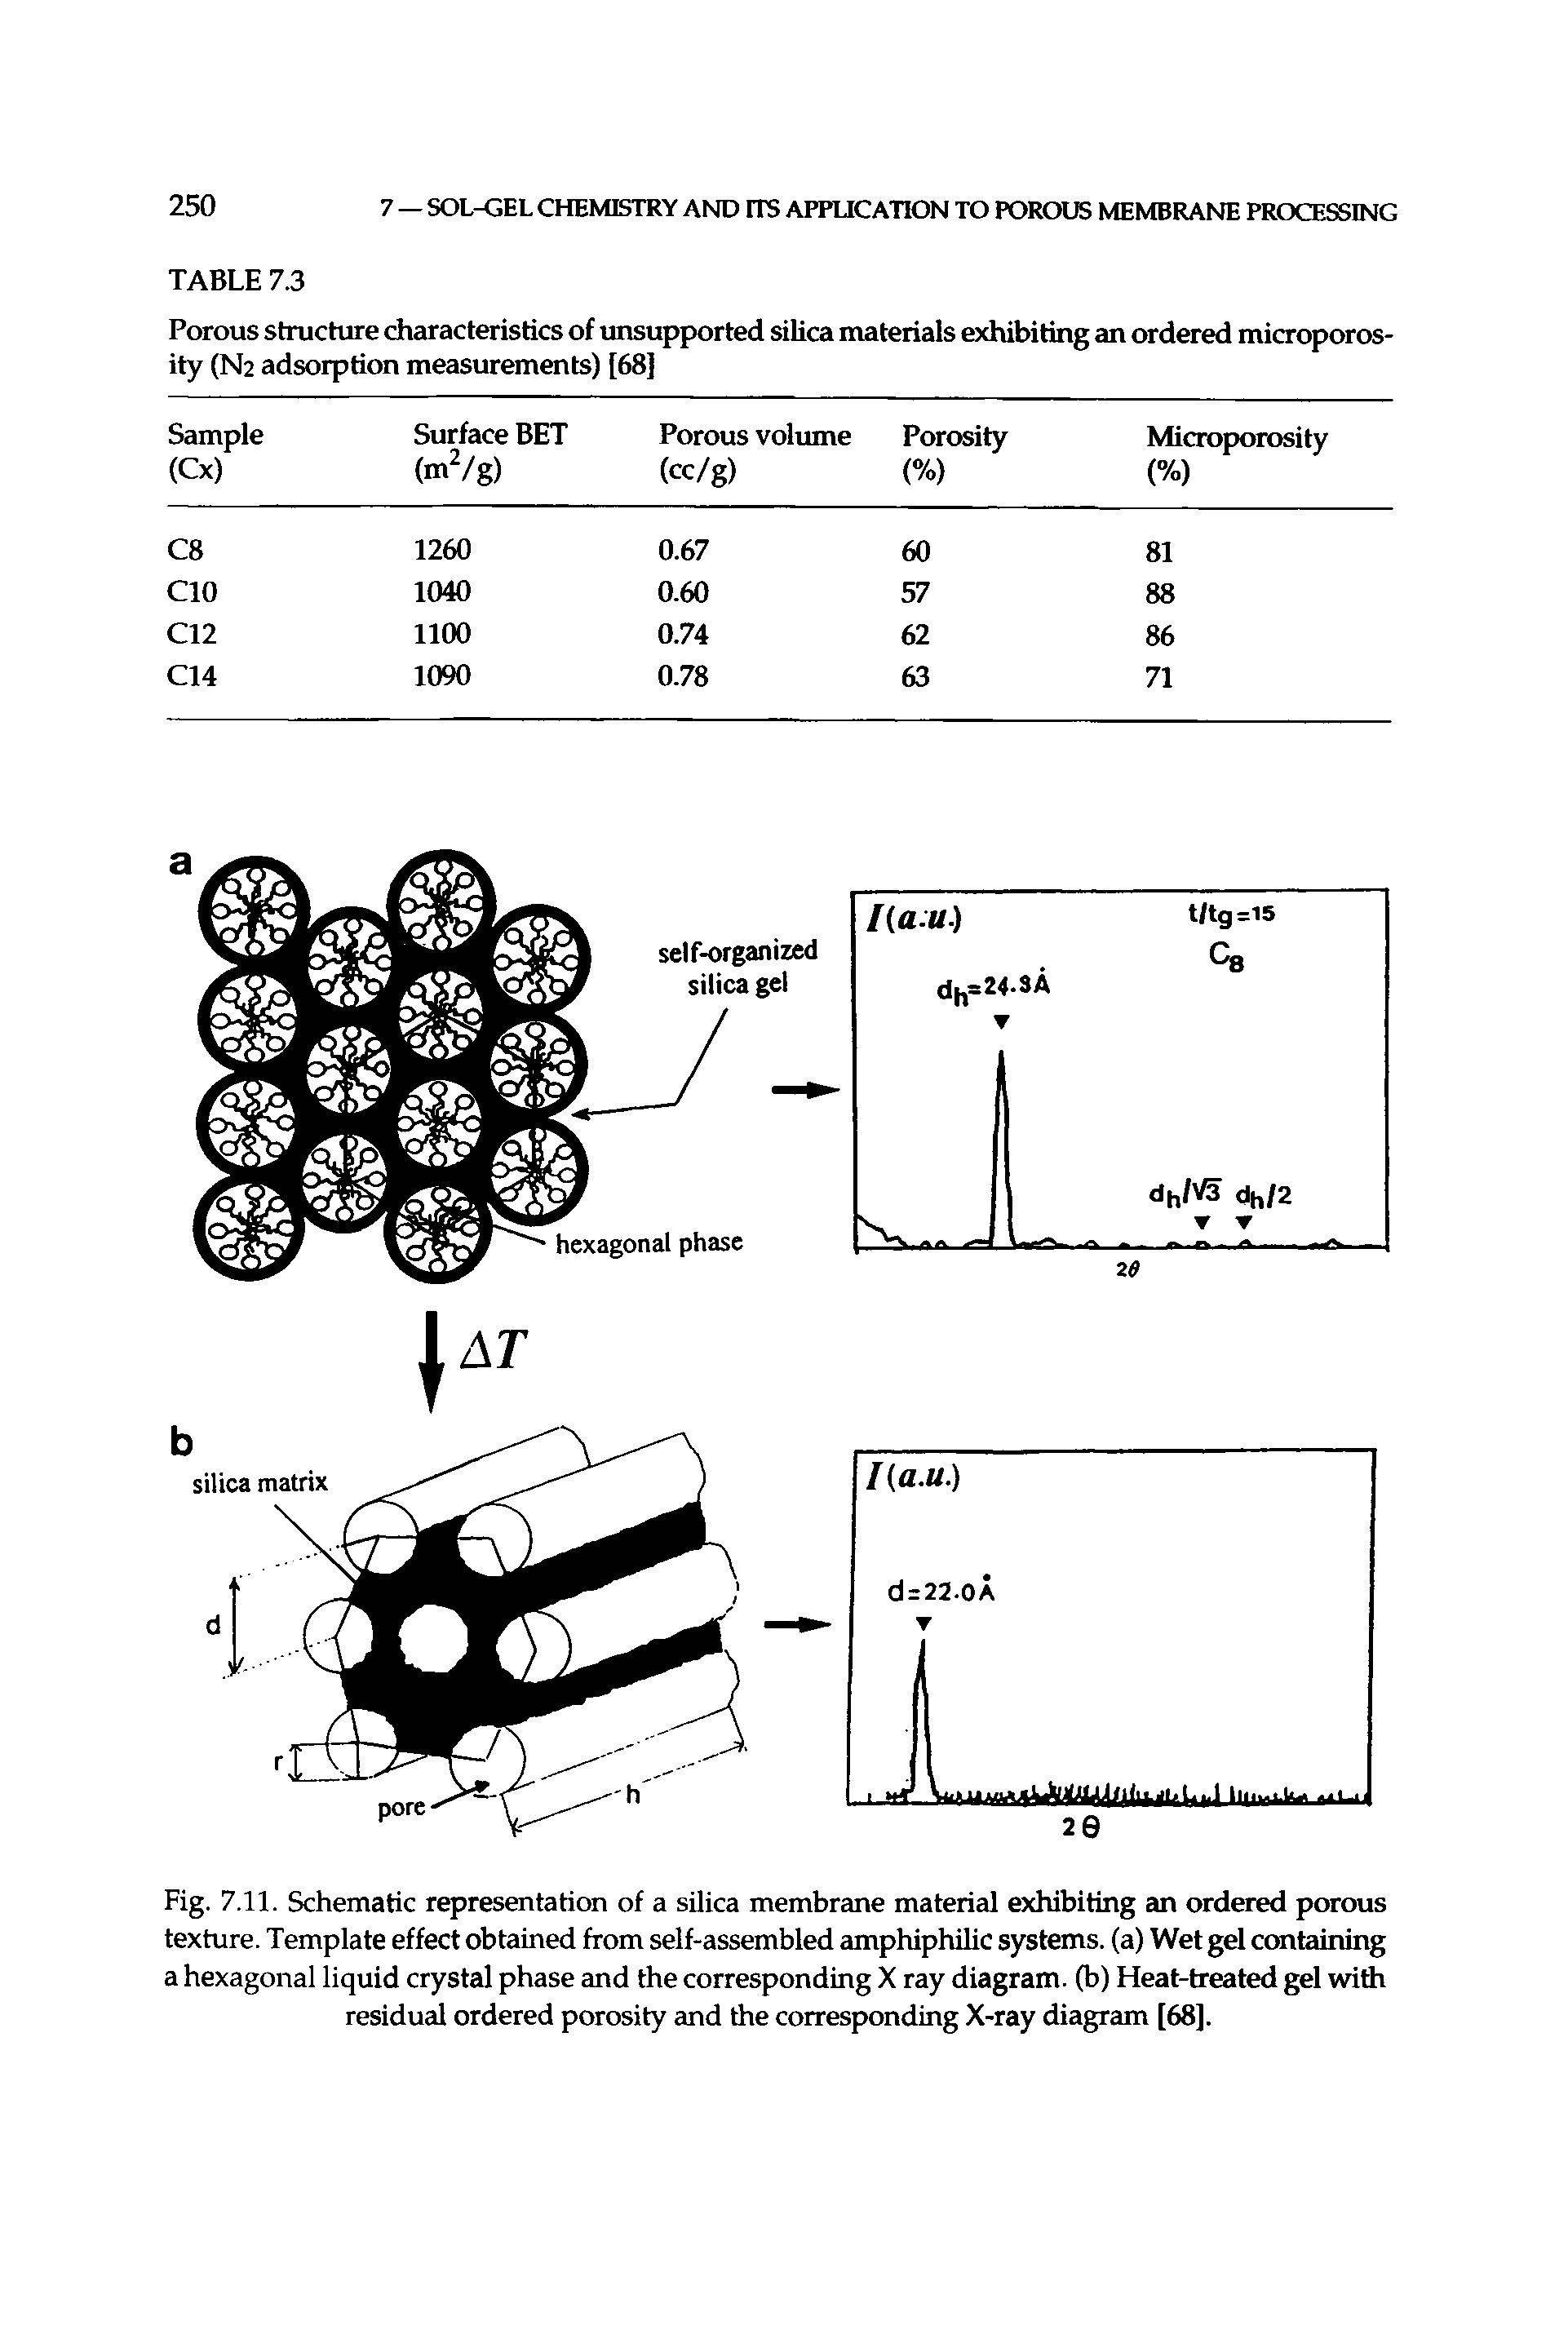 Fig. 7.11. Schematic representation of a silica membrane material exhibiting an ordered porous texture. Template effect obtained from self-assembled amphiphilic systems, (a) Wet gel ccmfeiining a hexagonal liquid crystal phase and the corresponding X ray diagram. G ) Heat-treated gel with residual ordered porosity and the corresponding X-ray diagram [68].